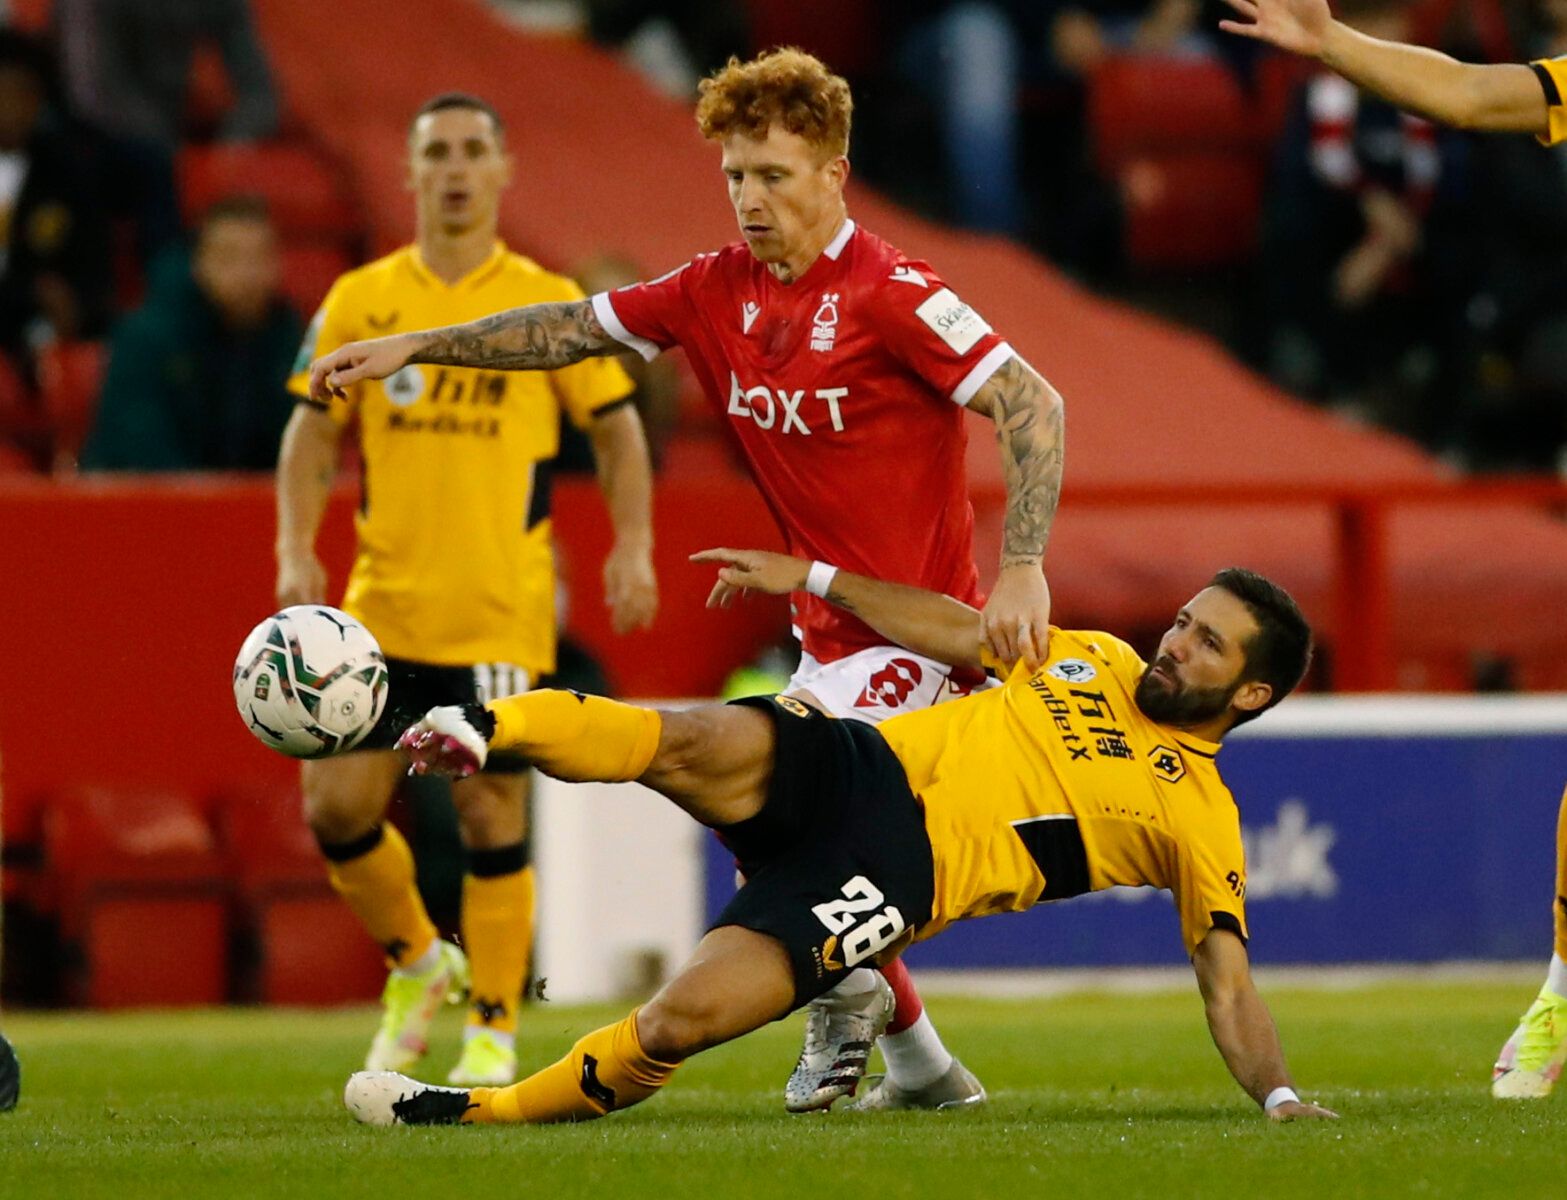 Soccer - England - Carabao Cup Second Round - Nottingham Forest v Wolverhampton Wanderers - The City Ground, Nottingham, Britain - August 24, 2021 Nottingham Forest's Jack Colback in action with Wolverhampton Wanderers' Joao Moutinho Action Images via Reuters/Andrew Boyers